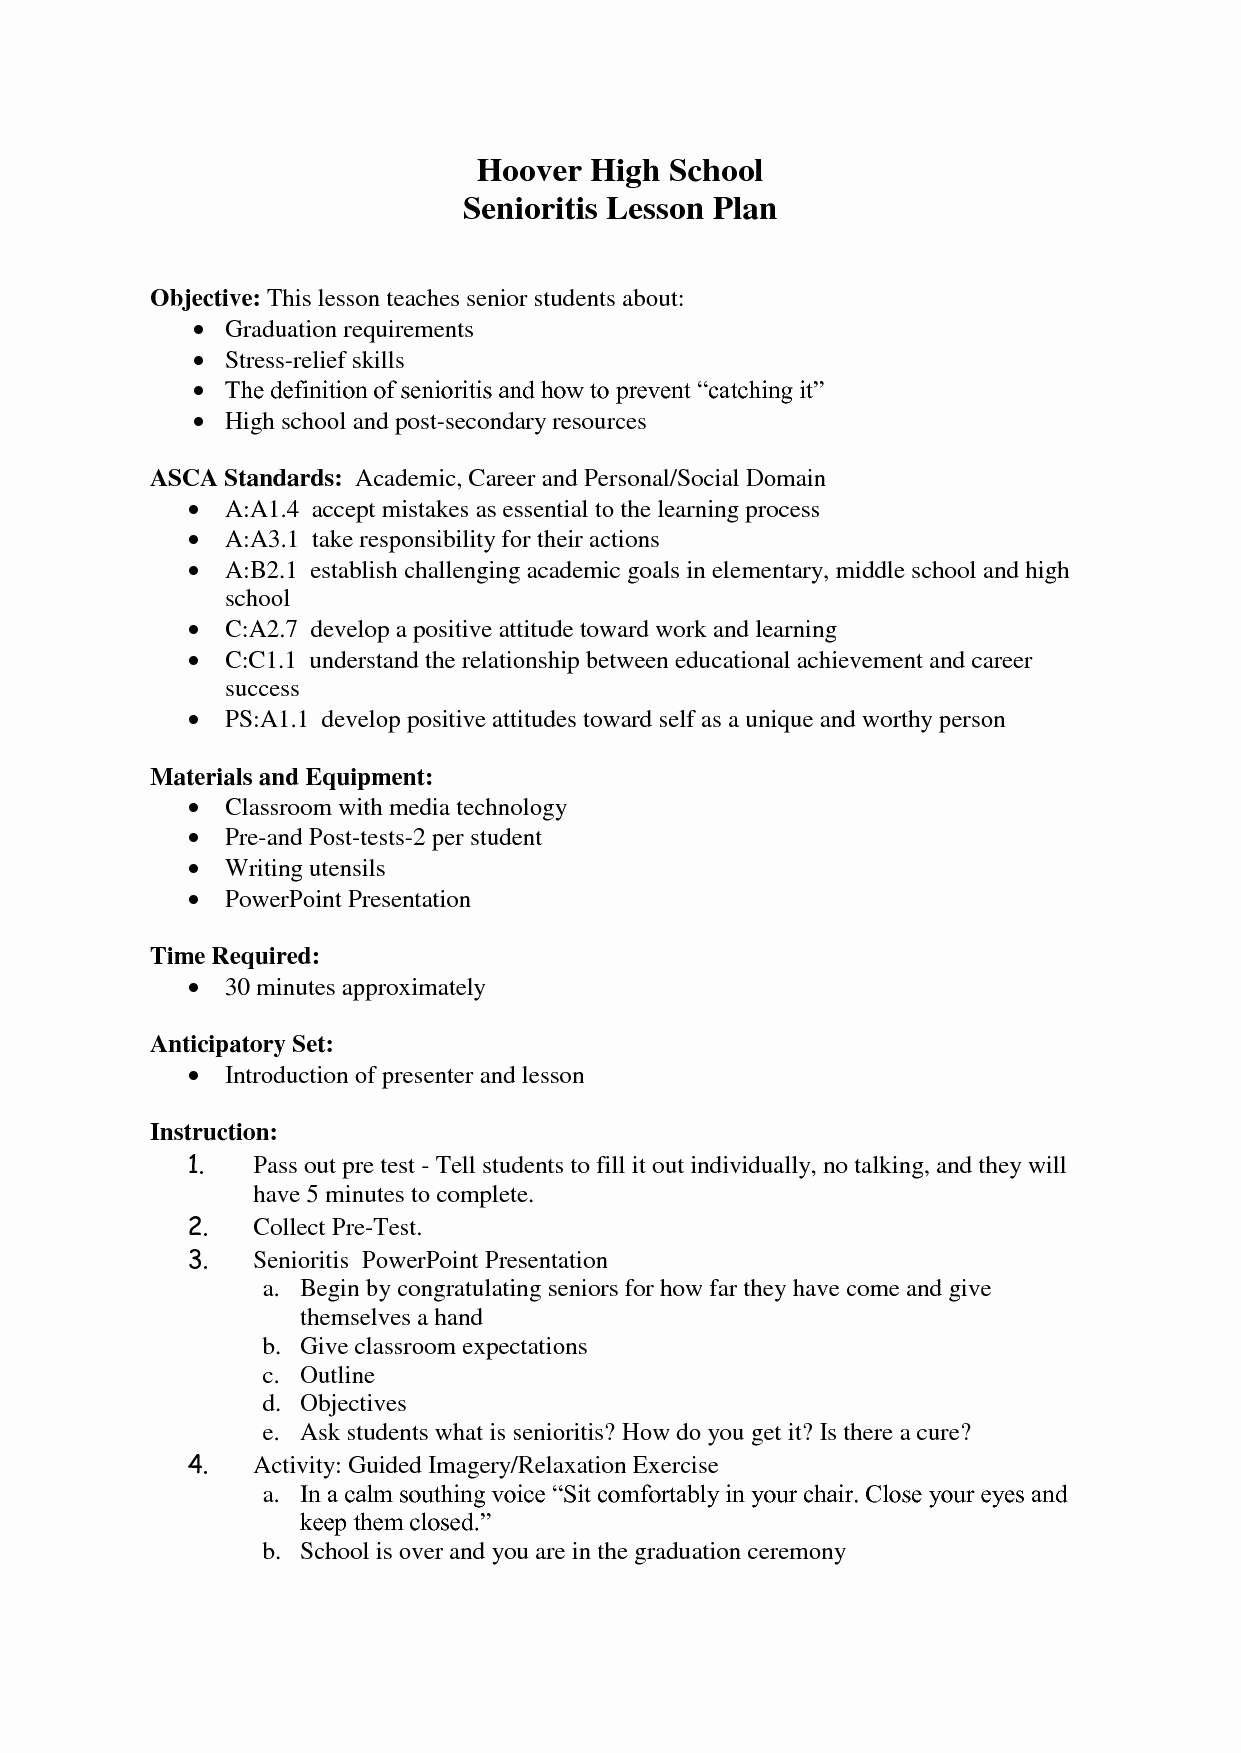 Resume Objective Statement Sample Resume For A Recent High School Graduate Valid Resume Objective Statement Examples For Graduate School New S Of Sample Resume For A Recent High School Graduate resume objective statement|wikiresume.com